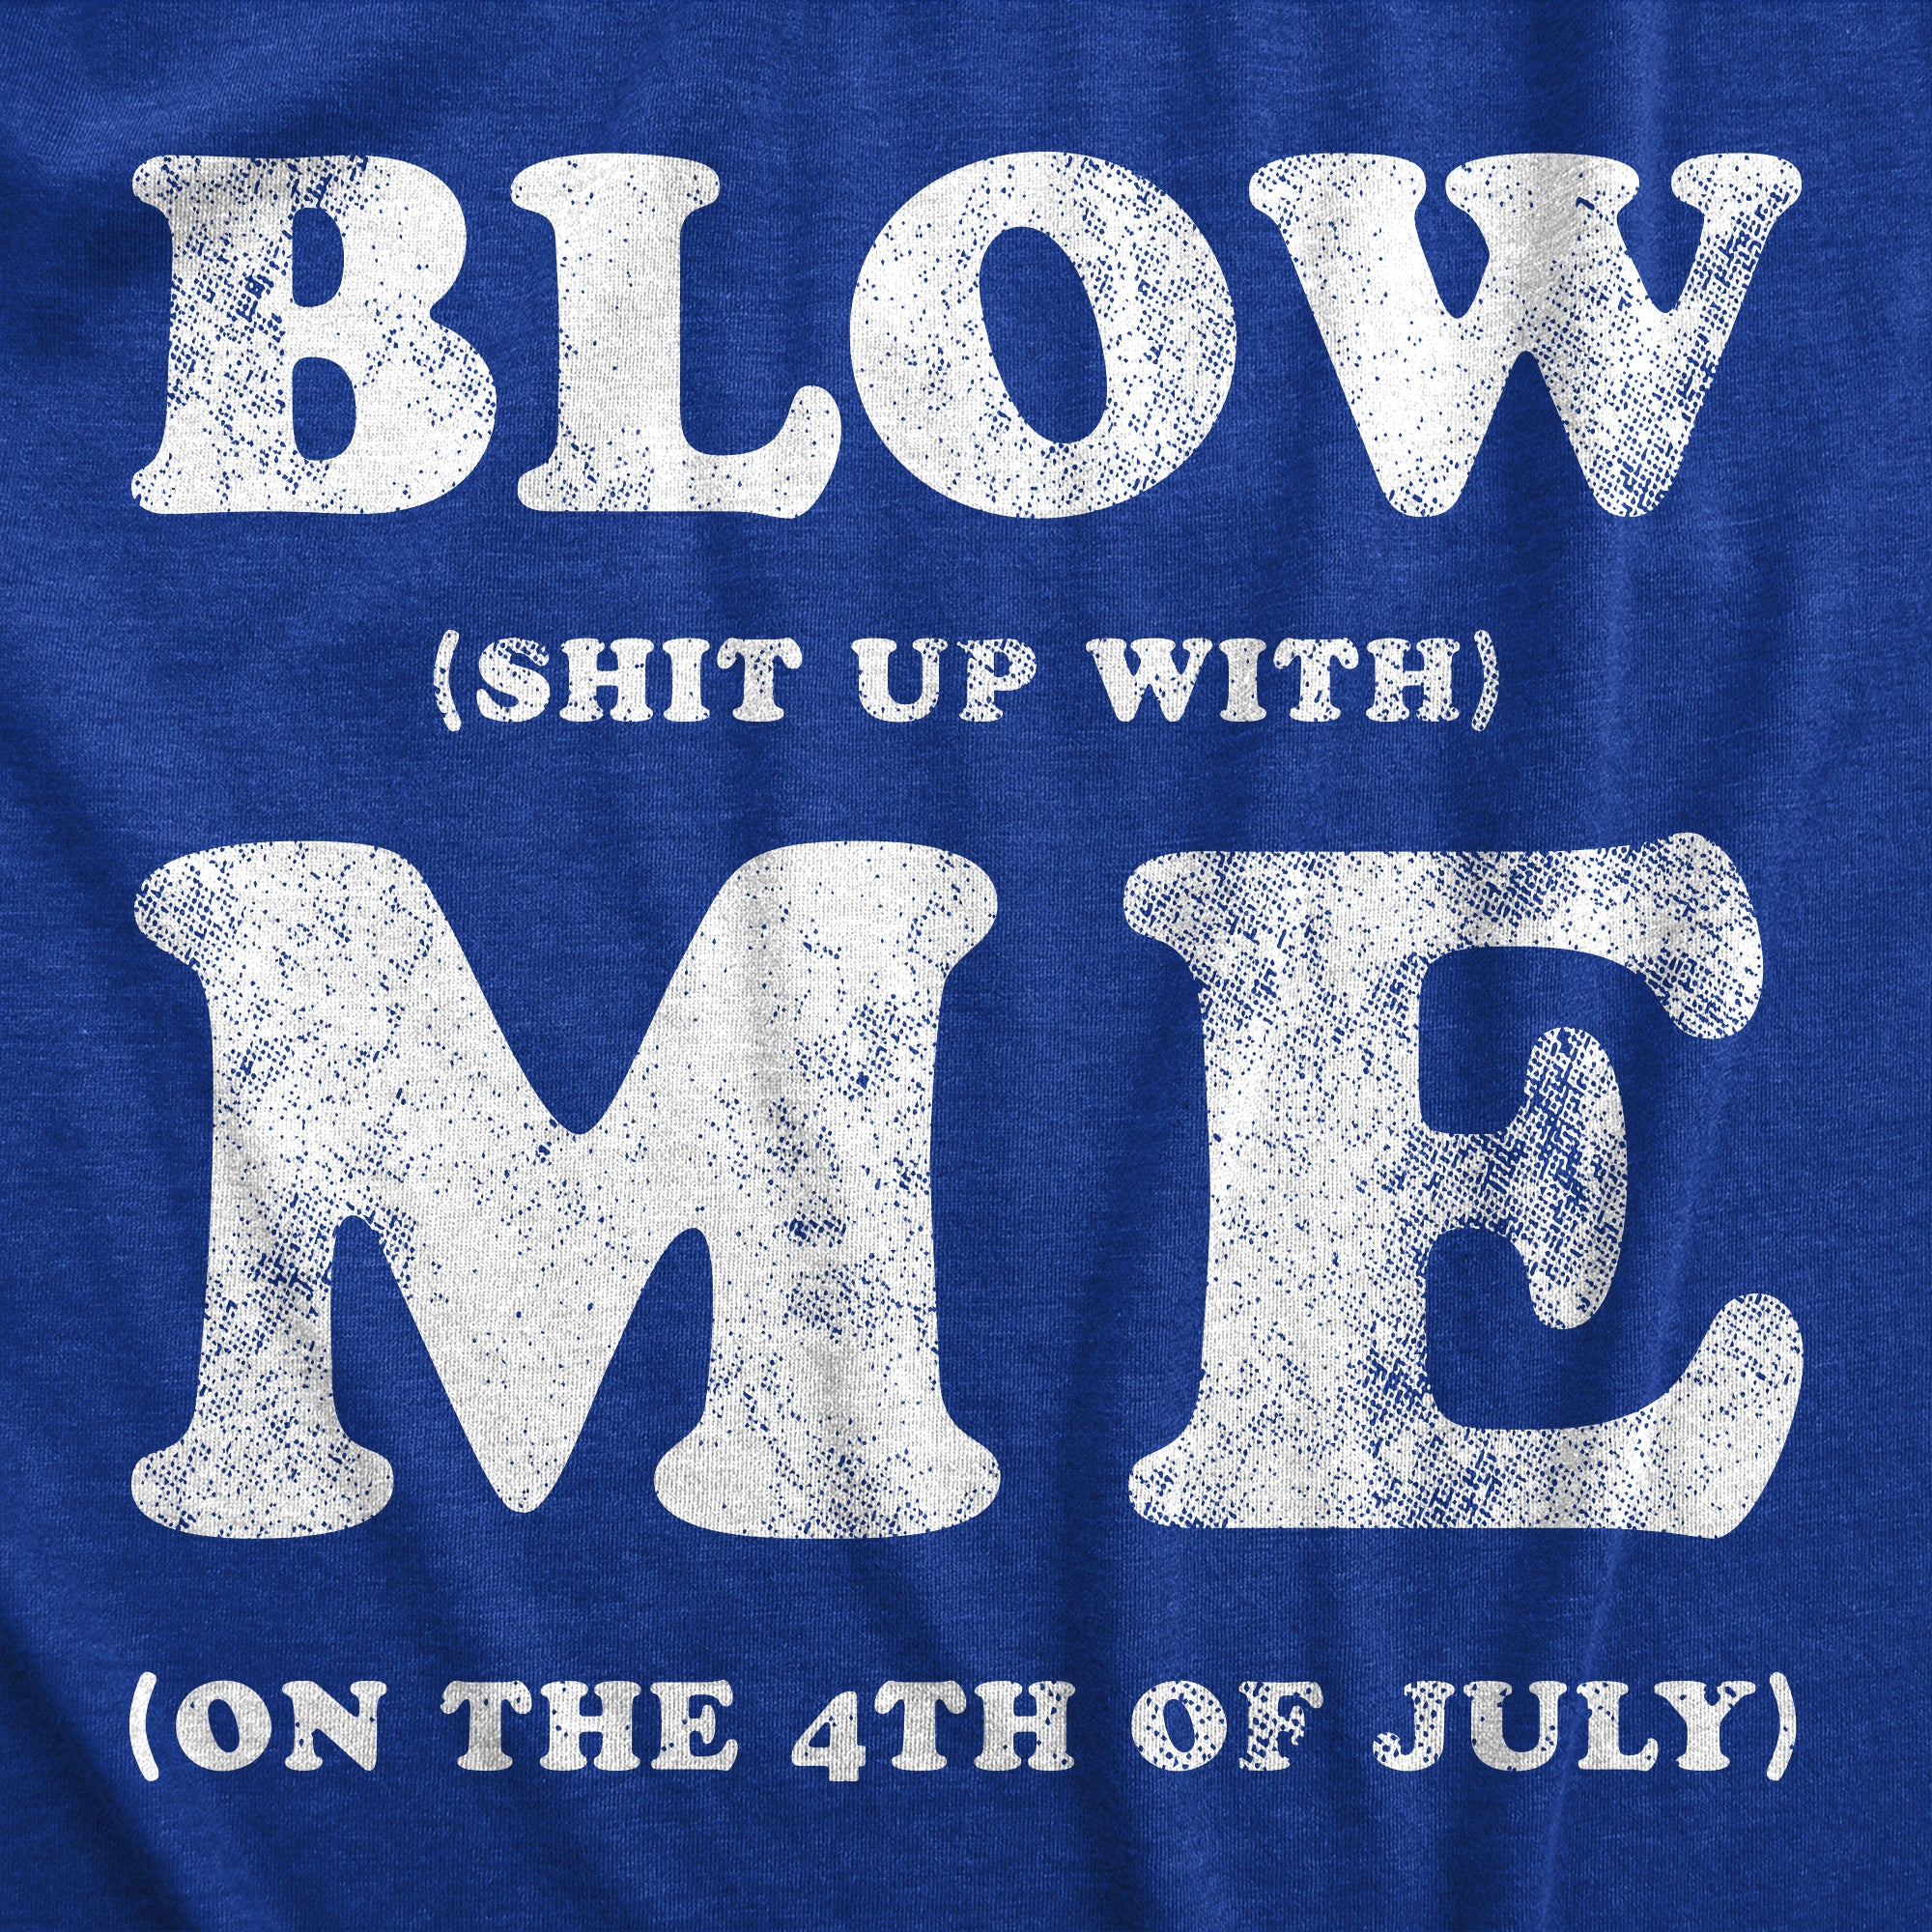 Funny Heather Royal - BLOW Blow Shit Up With Me Mens T Shirt Nerdy Fourth of July sex Tee